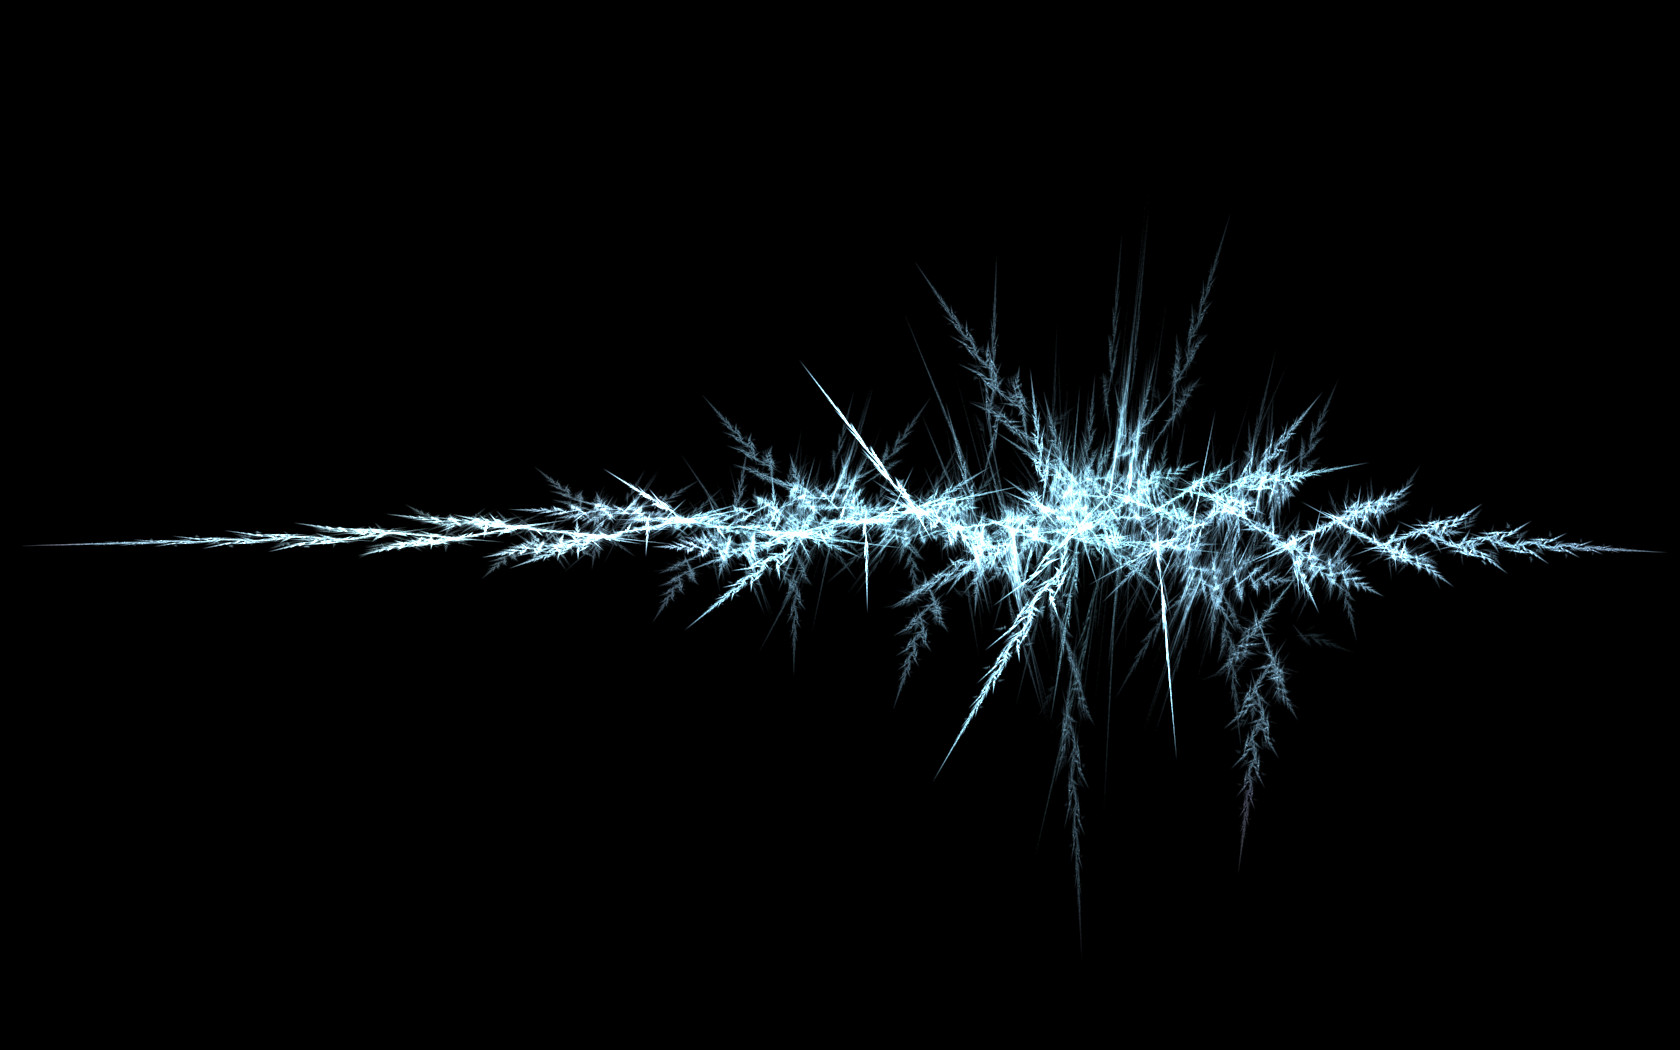 Dark Abstract 1663 Hd Wallpapers in Abstract   Imagescicom